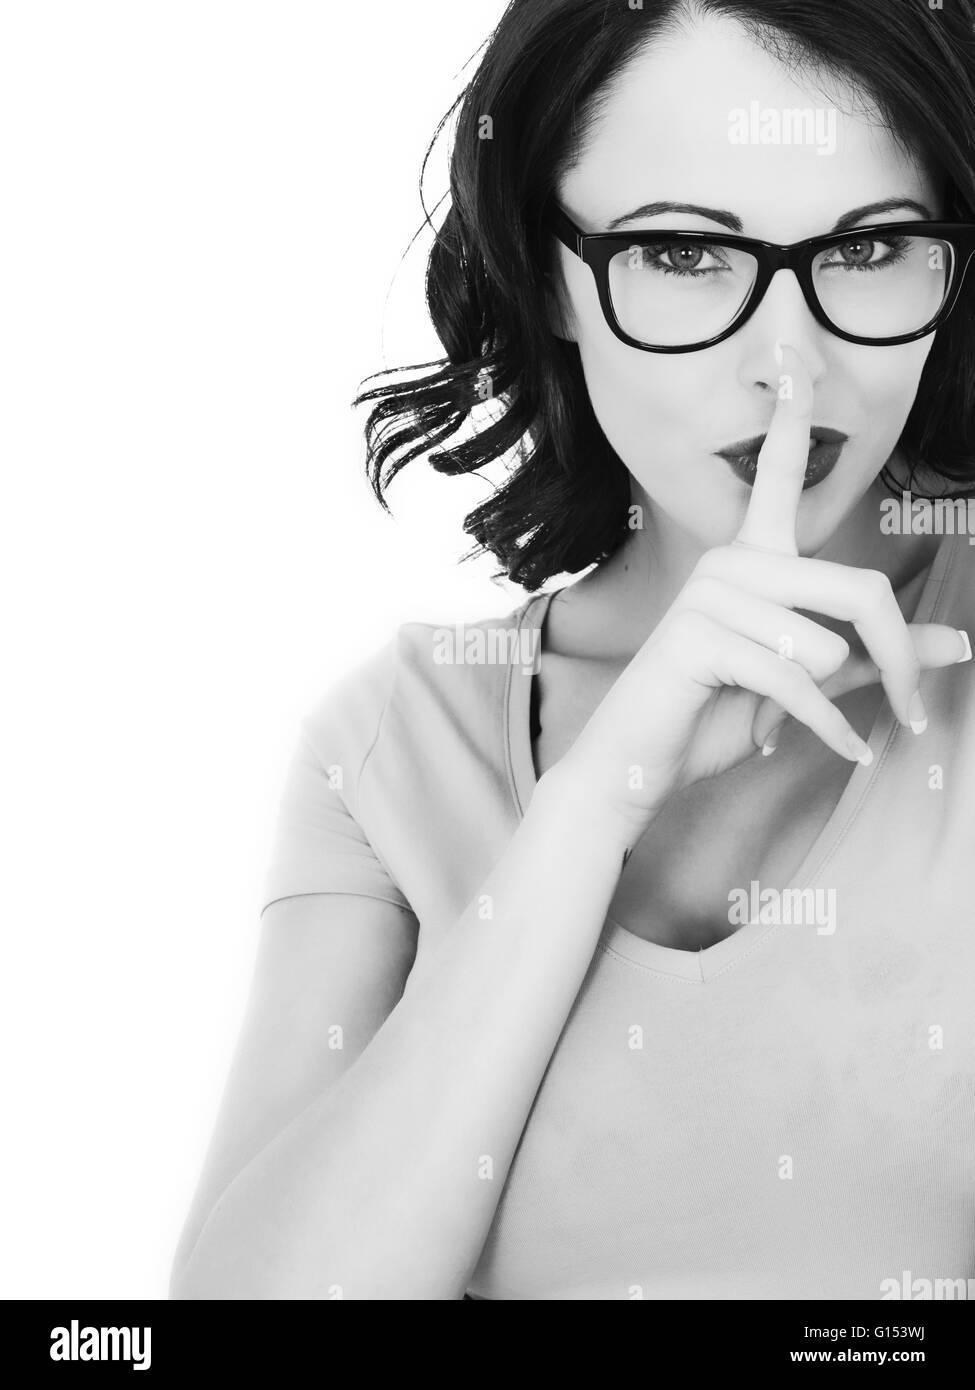 Portrait of a Woman Keeping a Secret With Her Finger Covering Her Lips Stock Photo